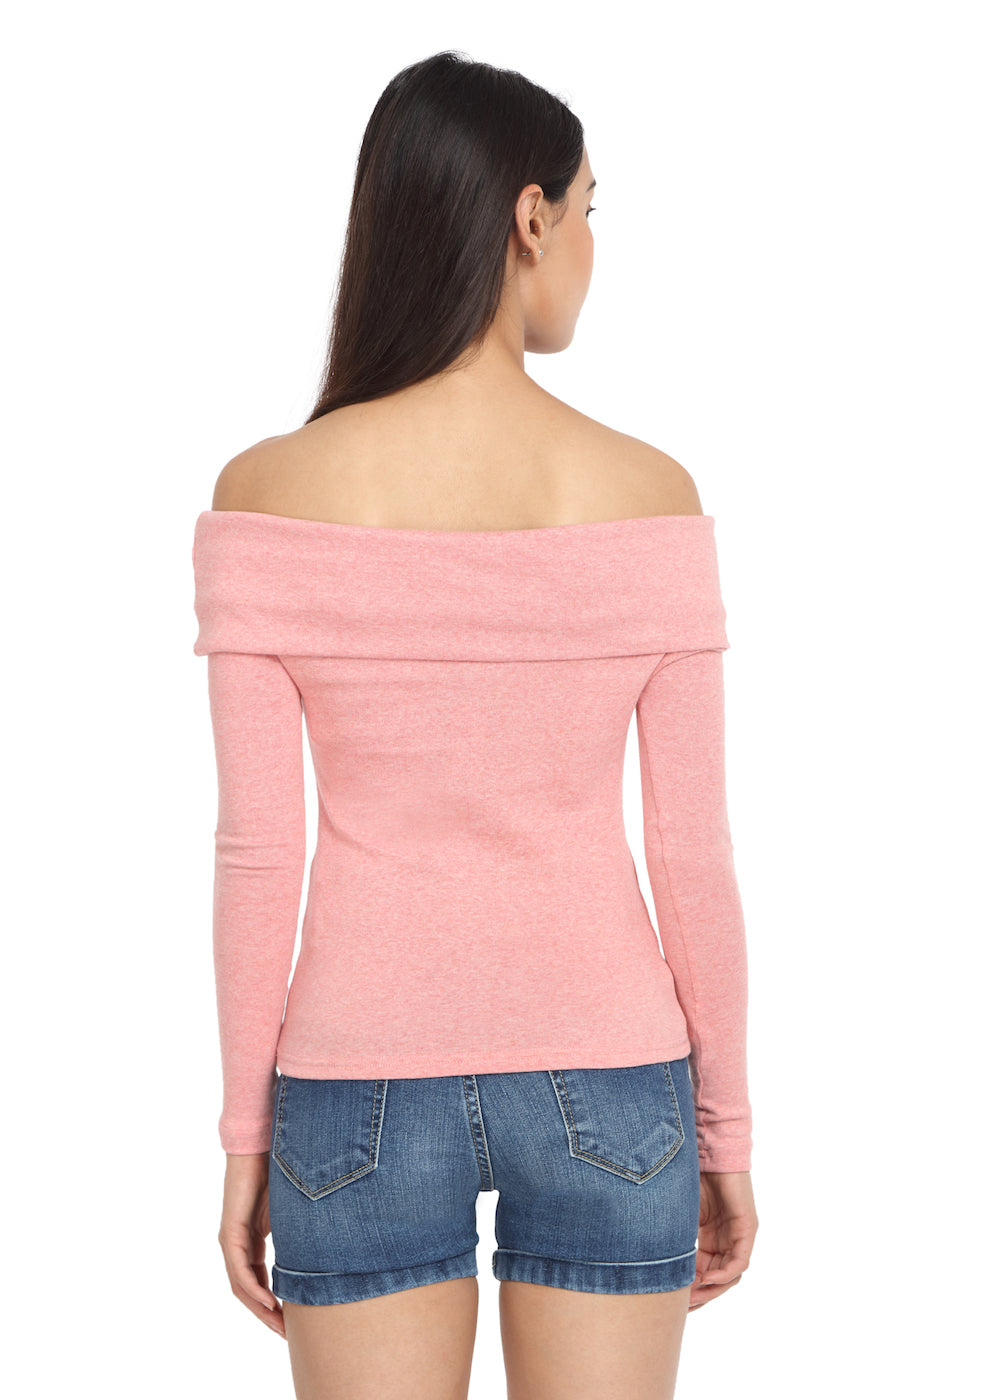 Peach Fold-Over Top - GENZEE